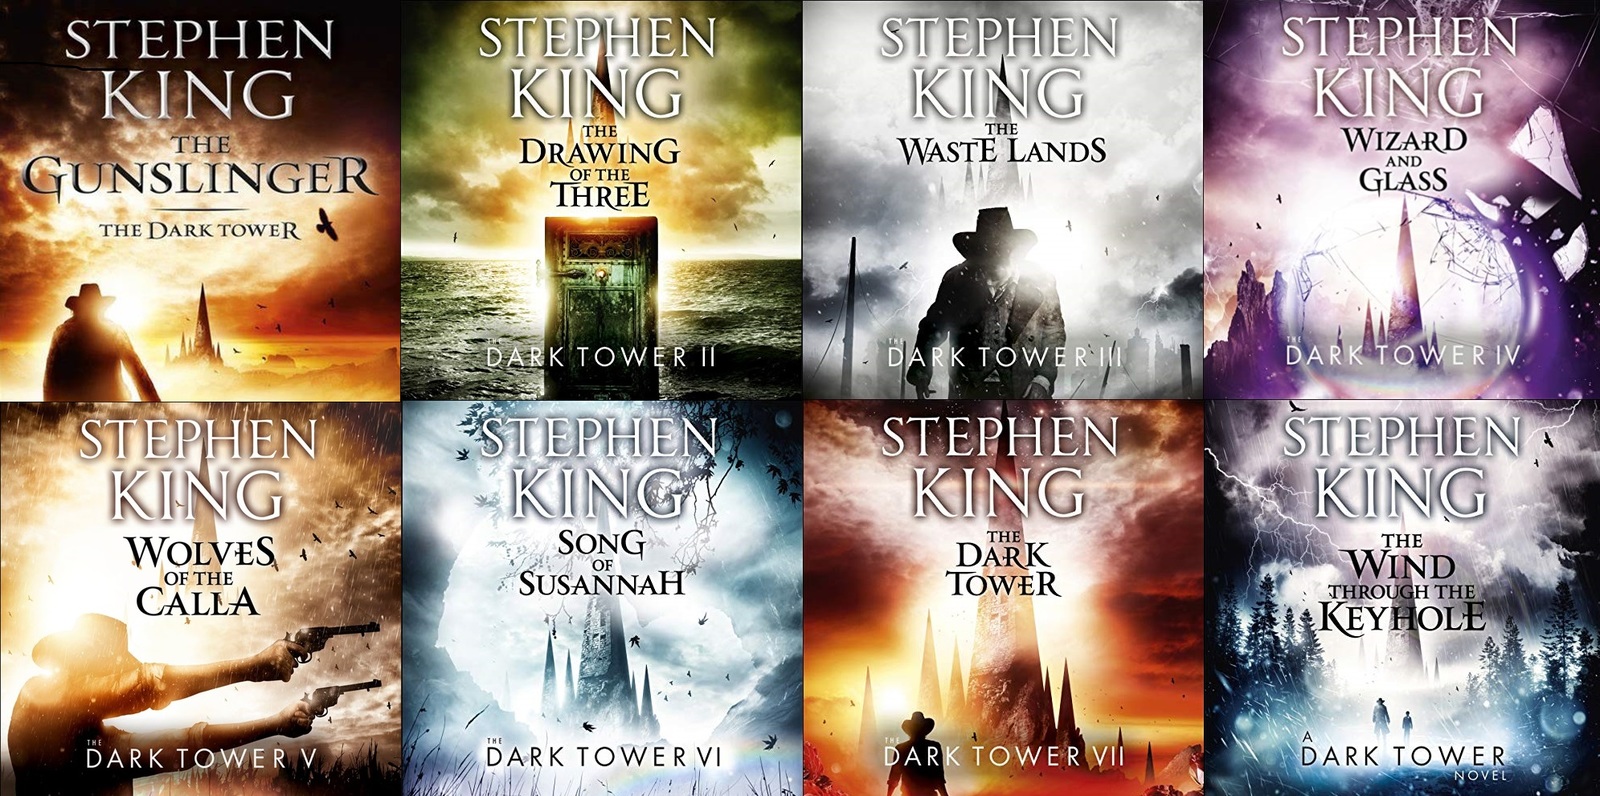 Primary image for The Dark Tower by Stephen King Complete Audiobooks